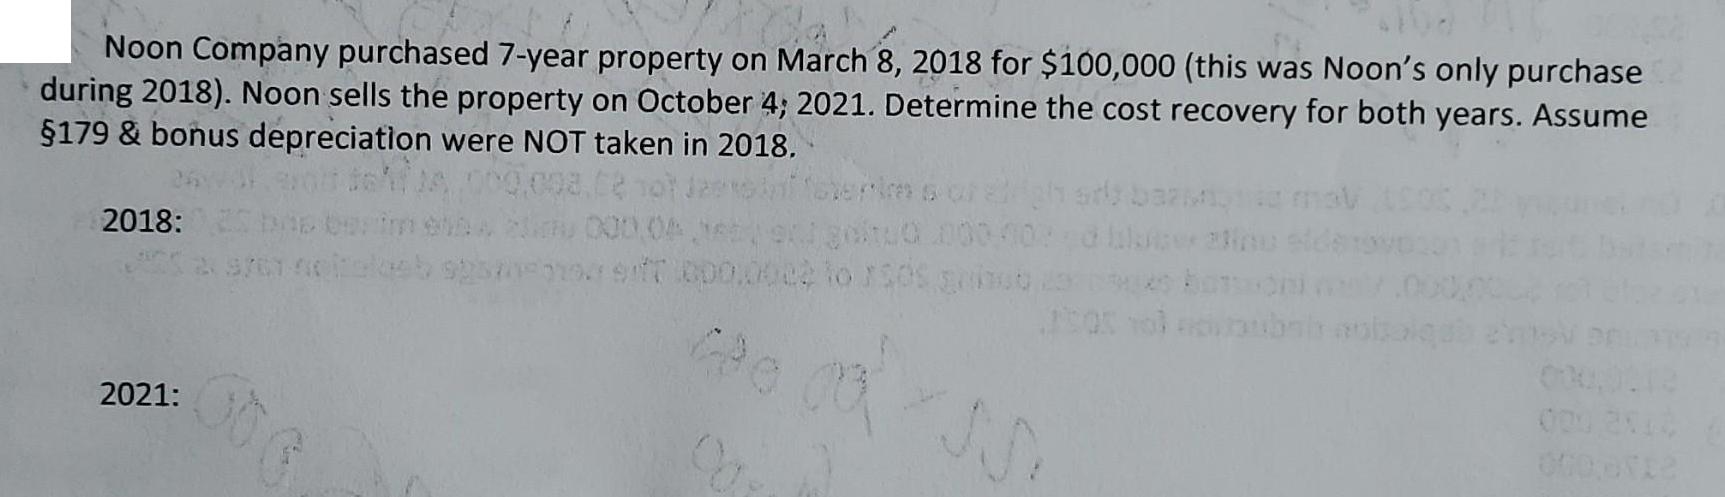 Noon Company purchased 7-year property on March 8, 2018 for $100,000 (this was Noon's only purchase during